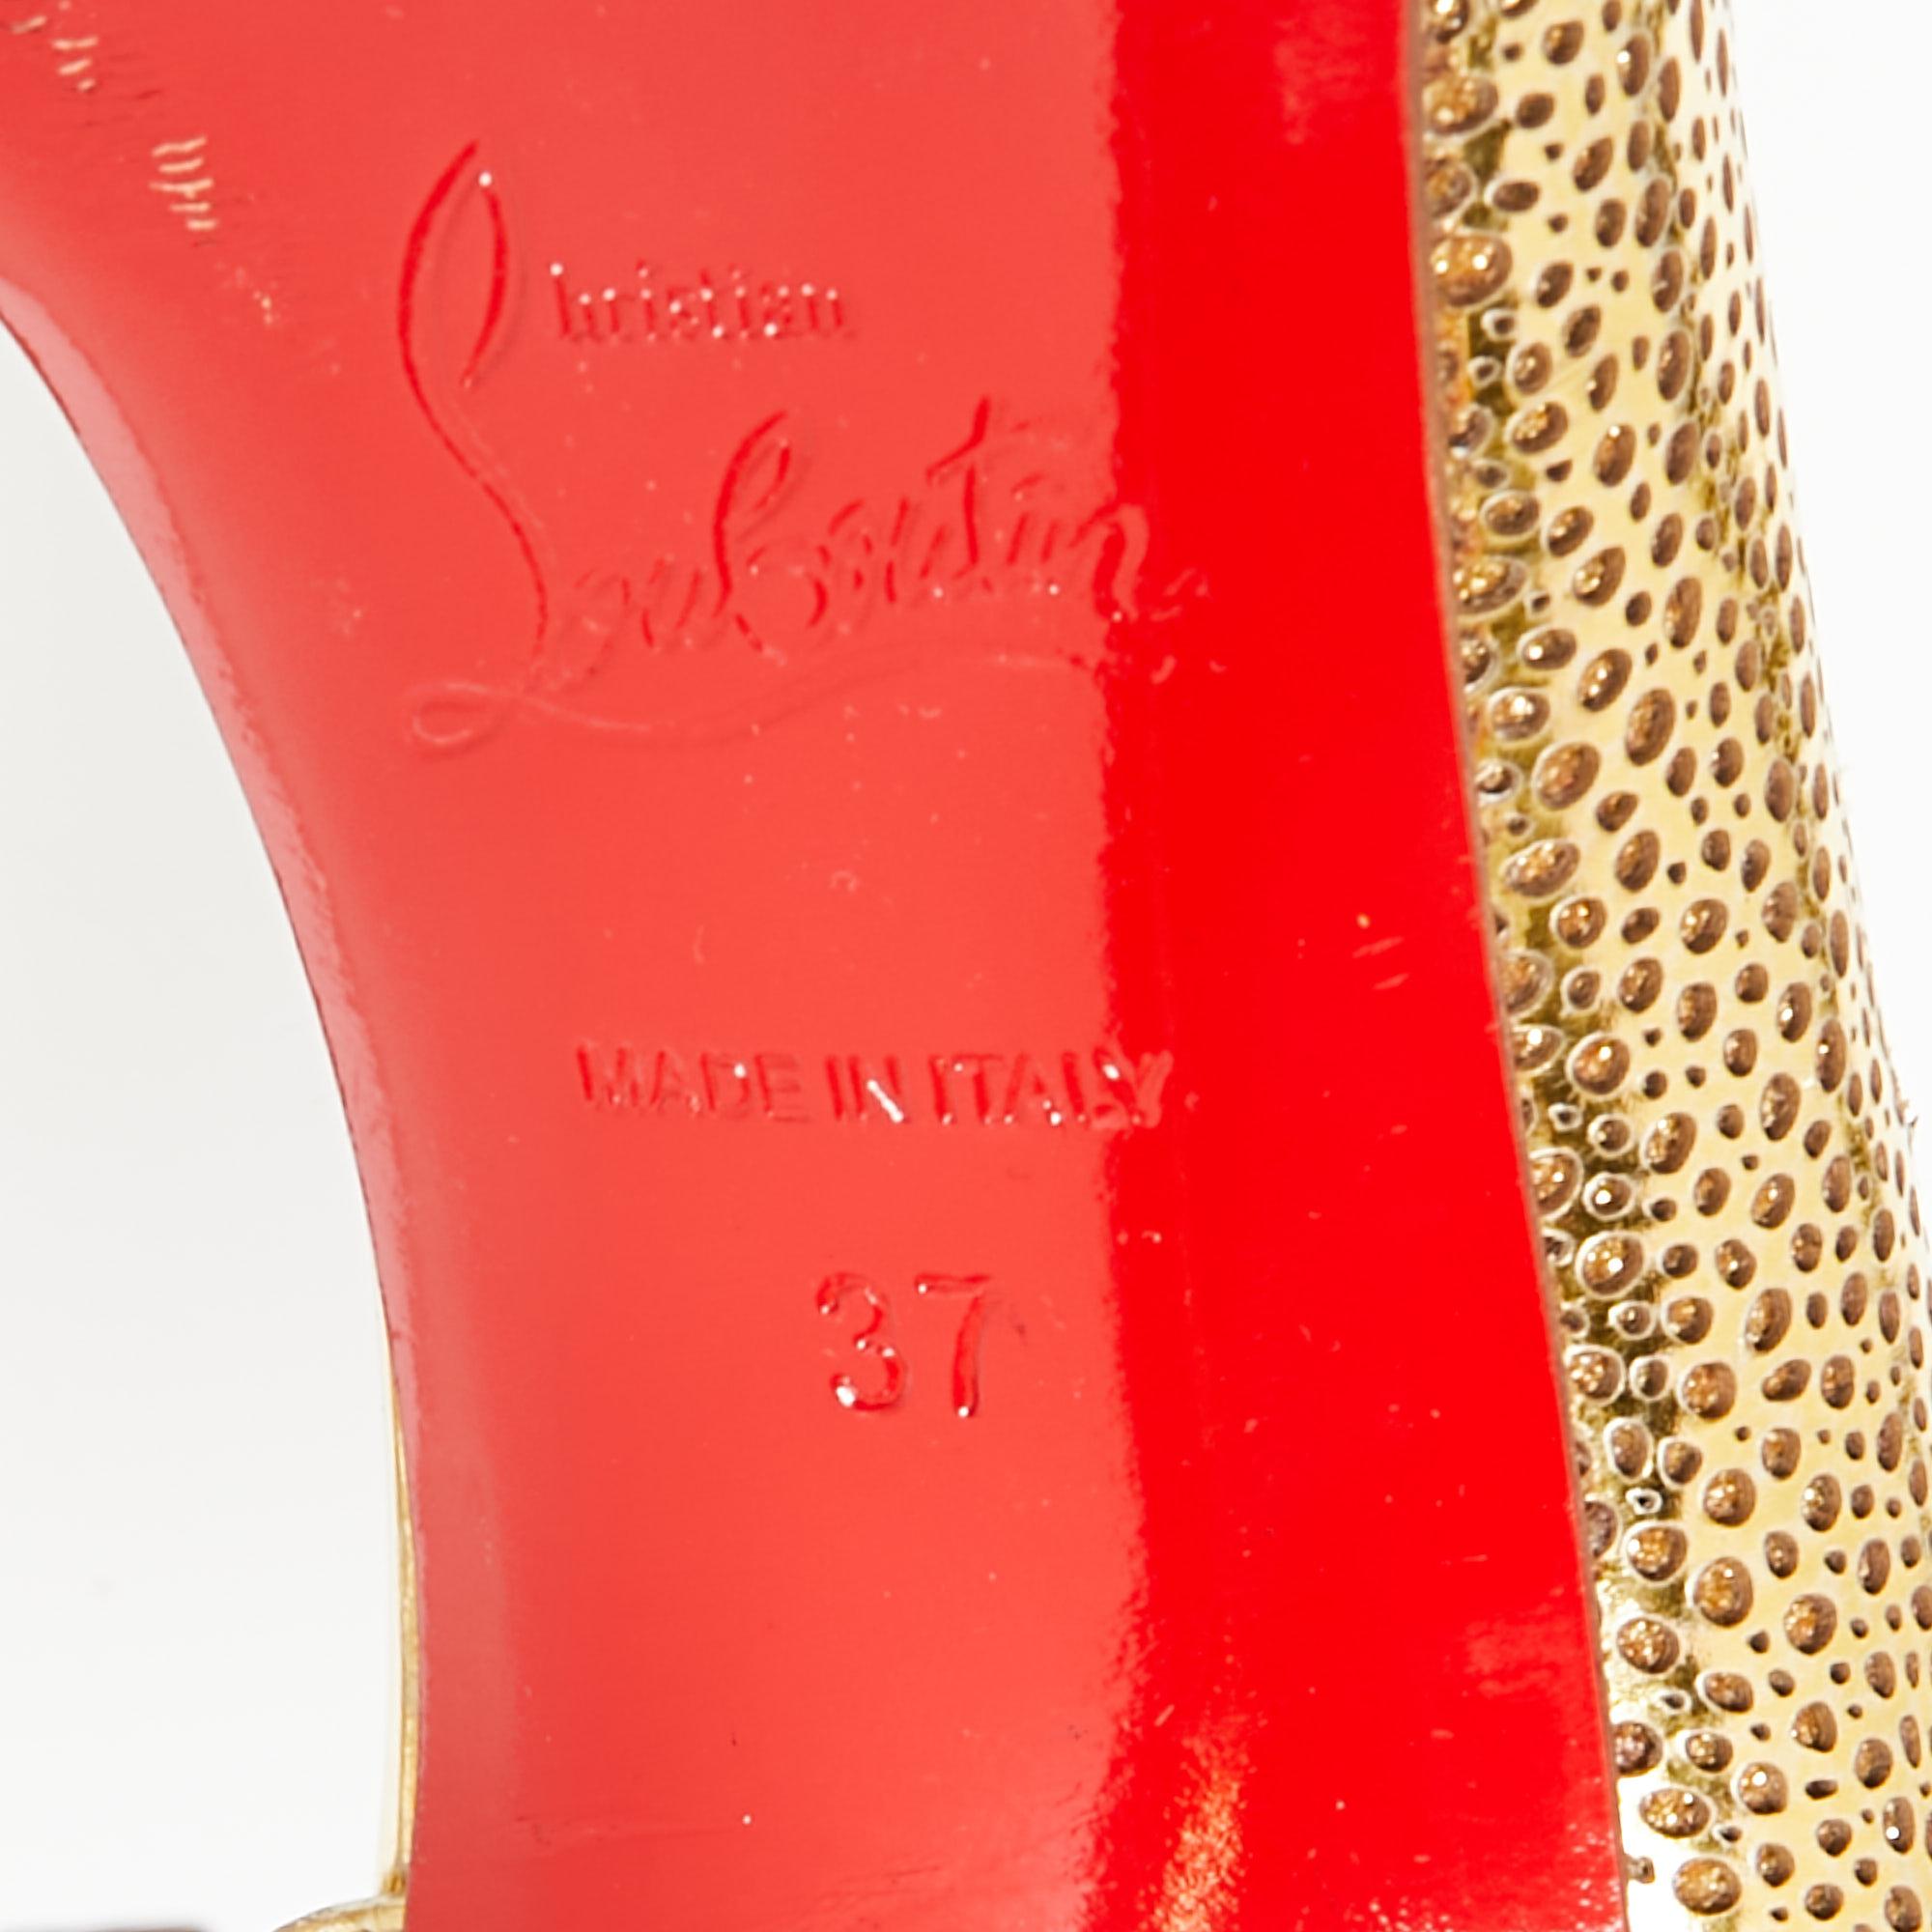 Women's Christian Louboutin Laser Cut Leather and Glitter Galu D'orsay Pumps Size 37